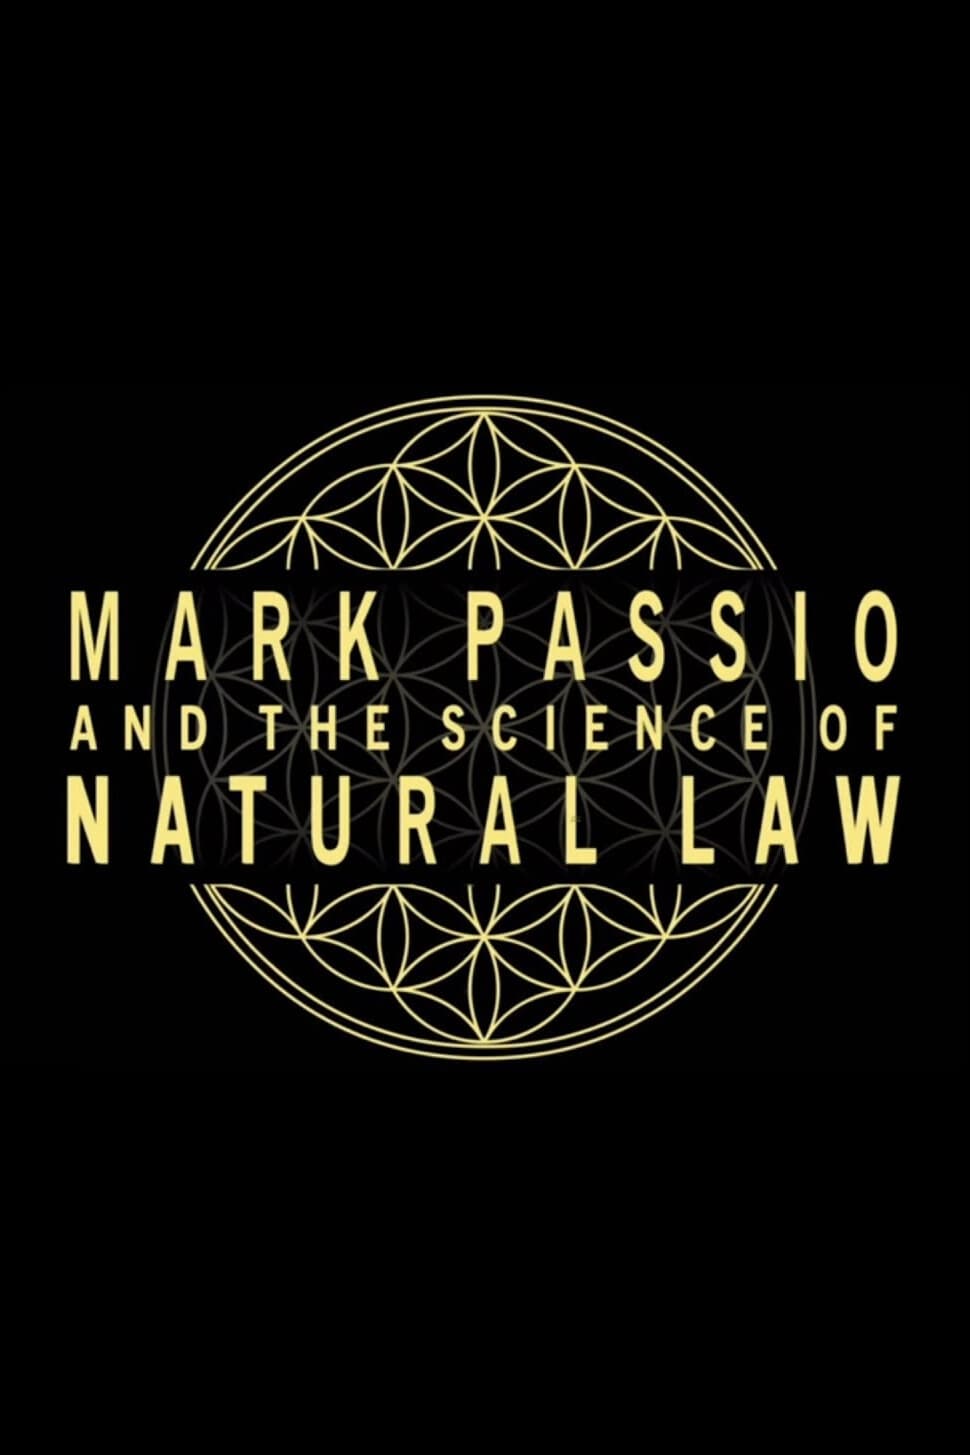 Mark Passio & The Science of Natural Law